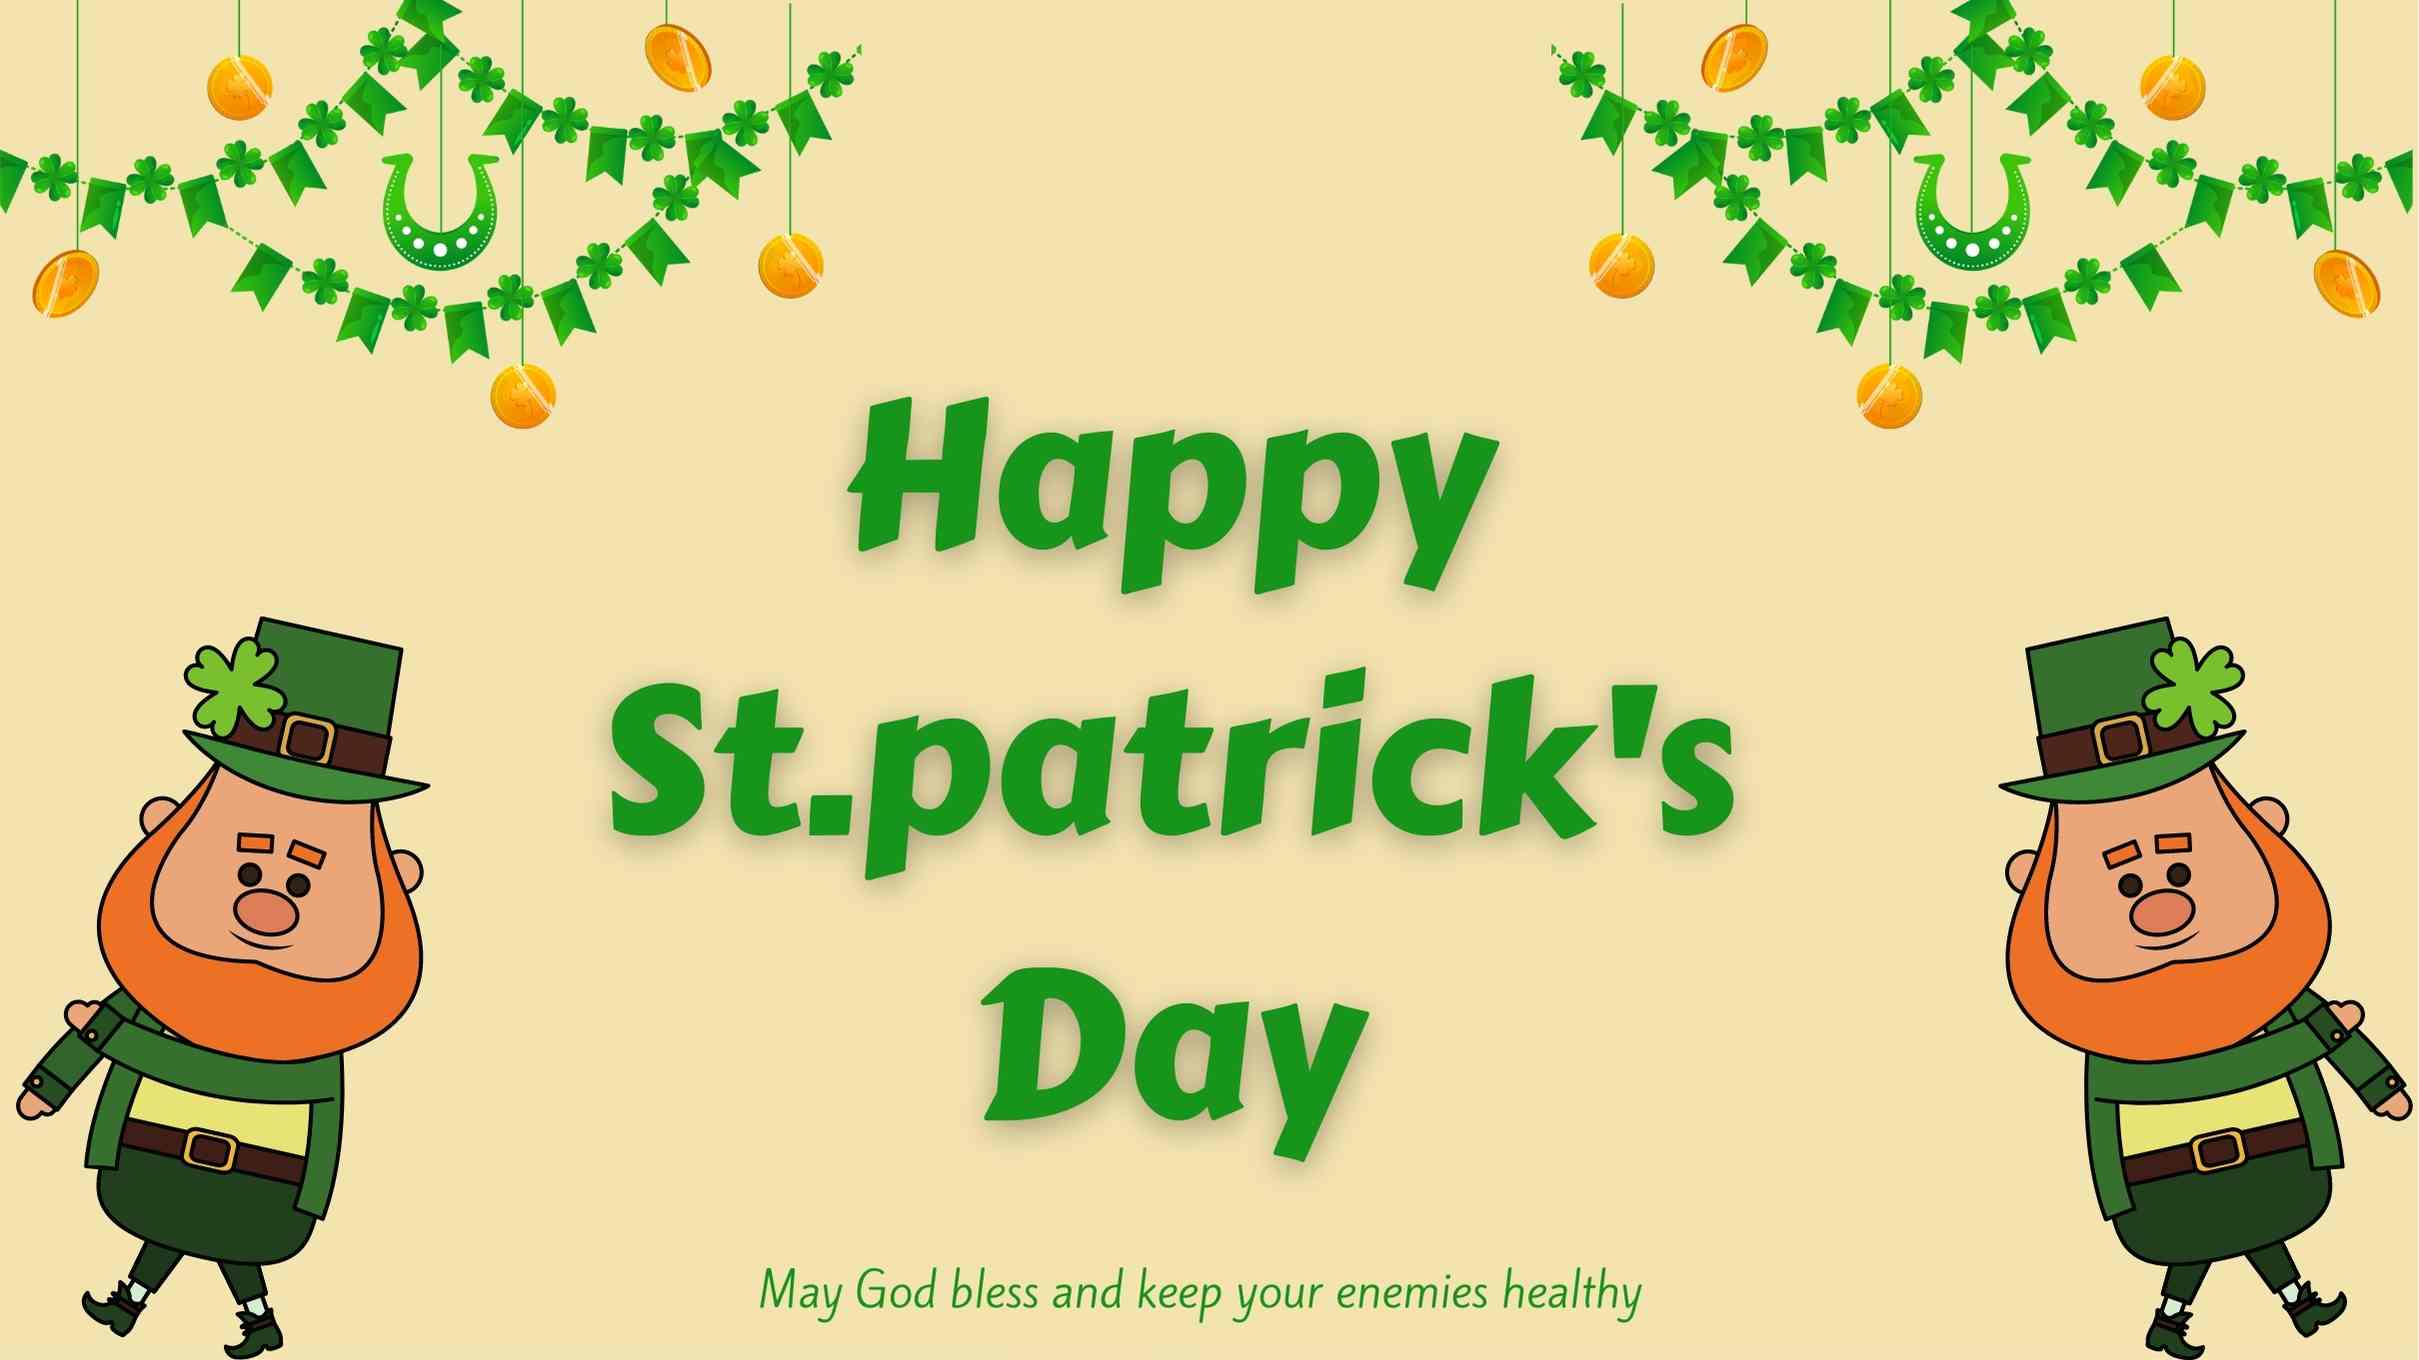 Happy St. Patrick's Day Wallpaper Funny Images